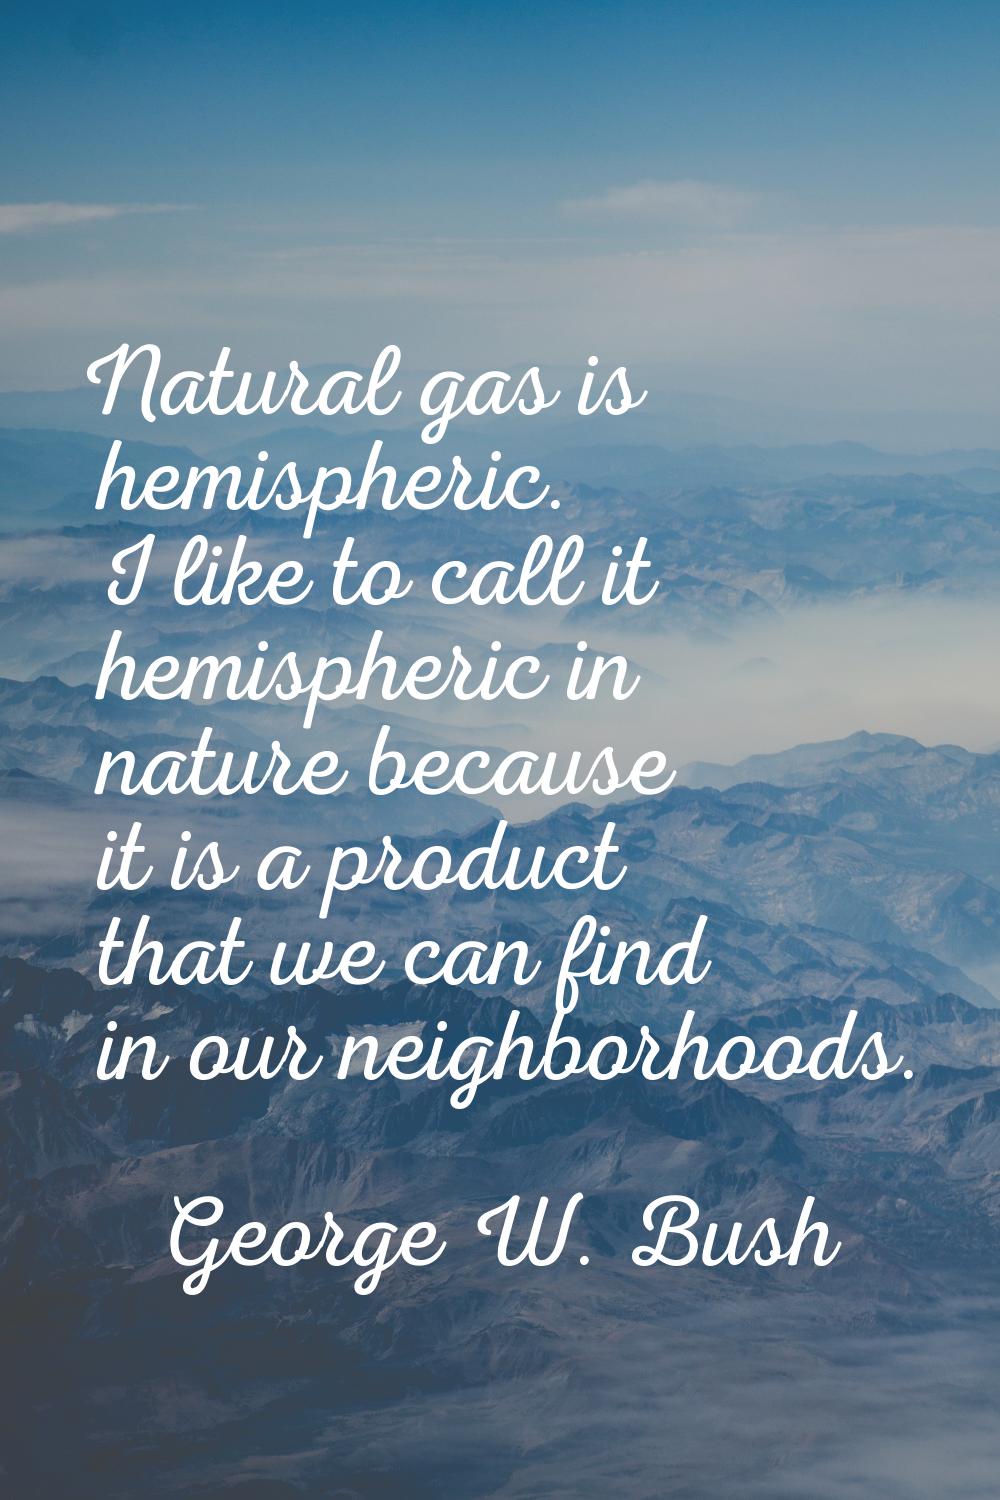 Natural gas is hemispheric. I like to call it hemispheric in nature because it is a product that we